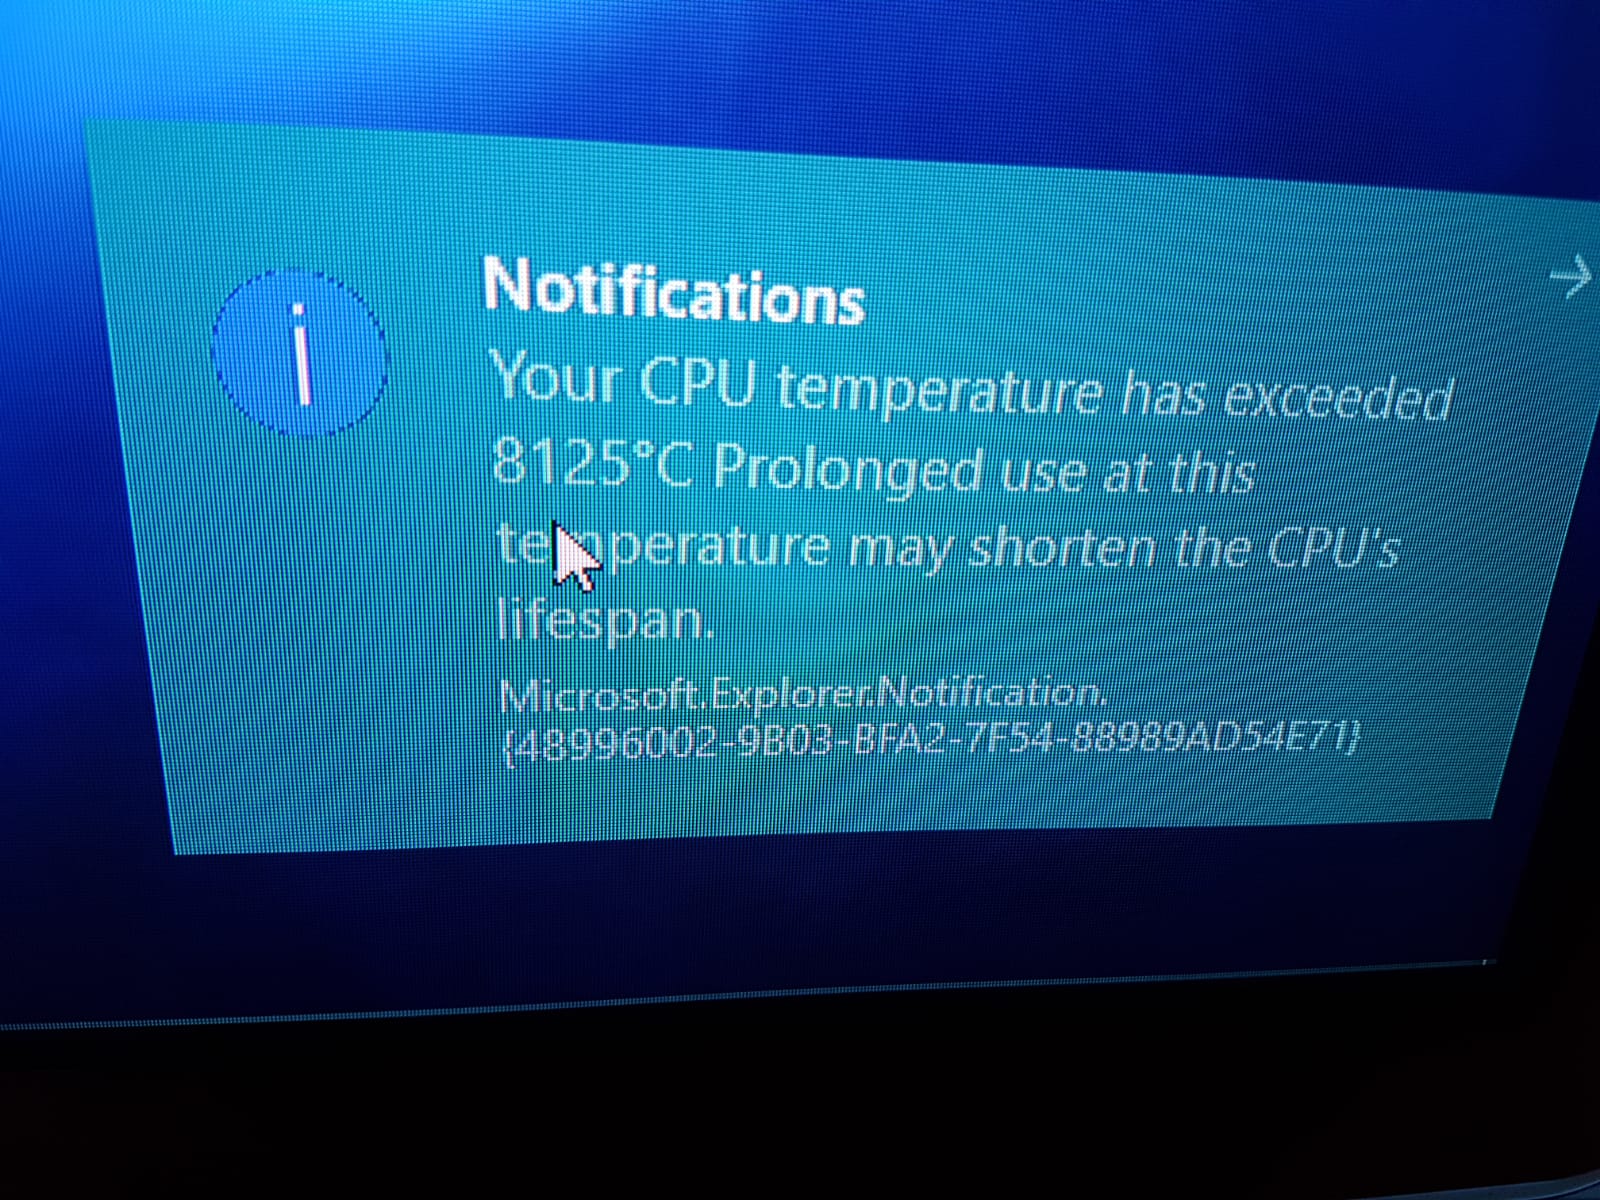 Your CPU temperature has exceeded 8125 Blank Meme Template